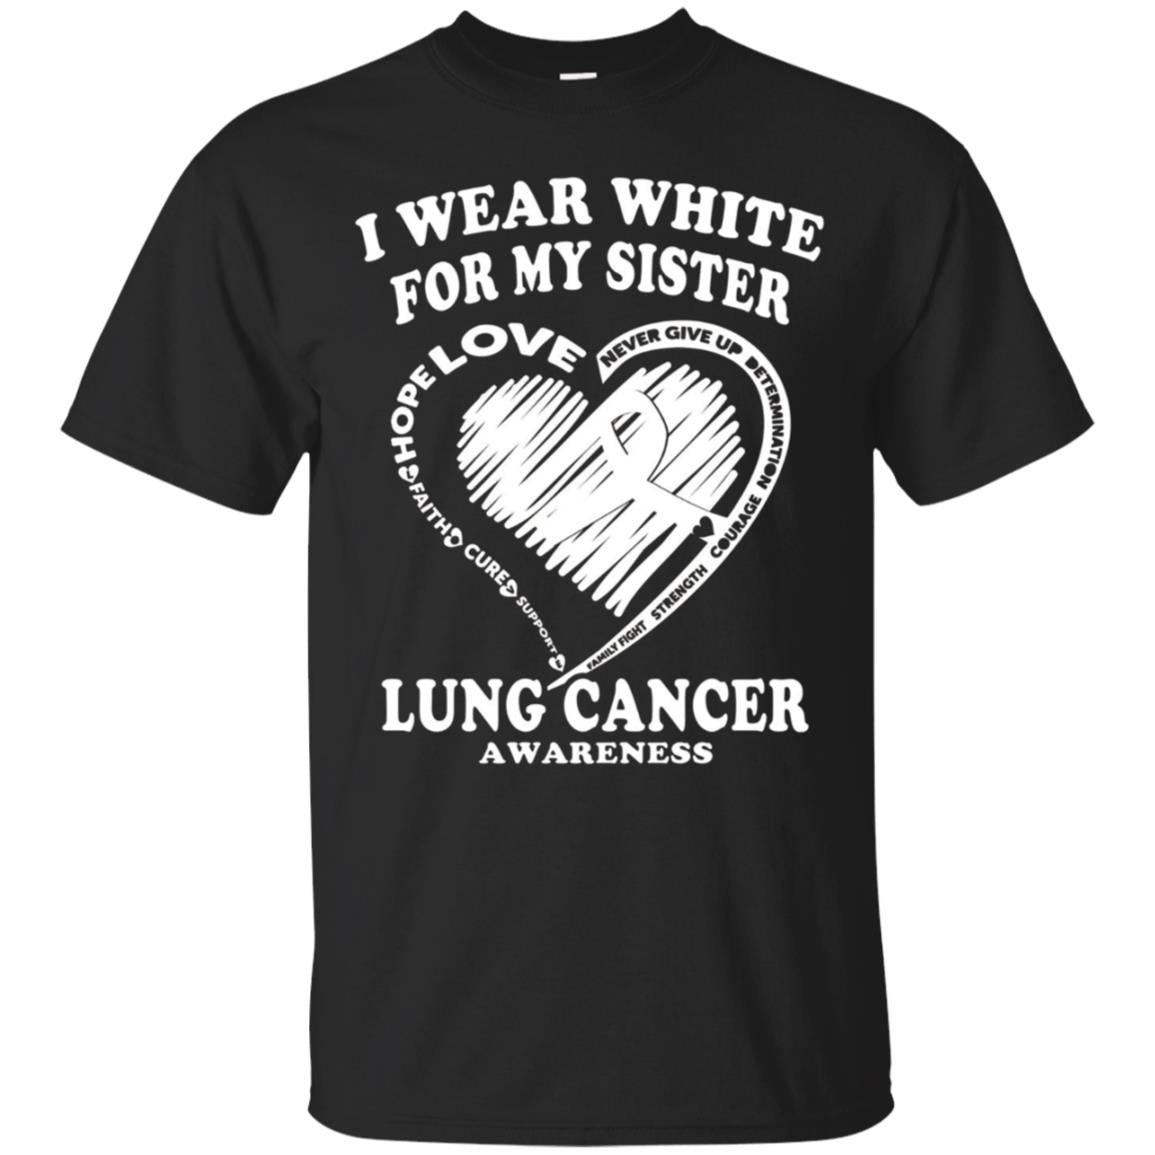 Lung Cancer Awareness T Shirt - I Wear For My Sister